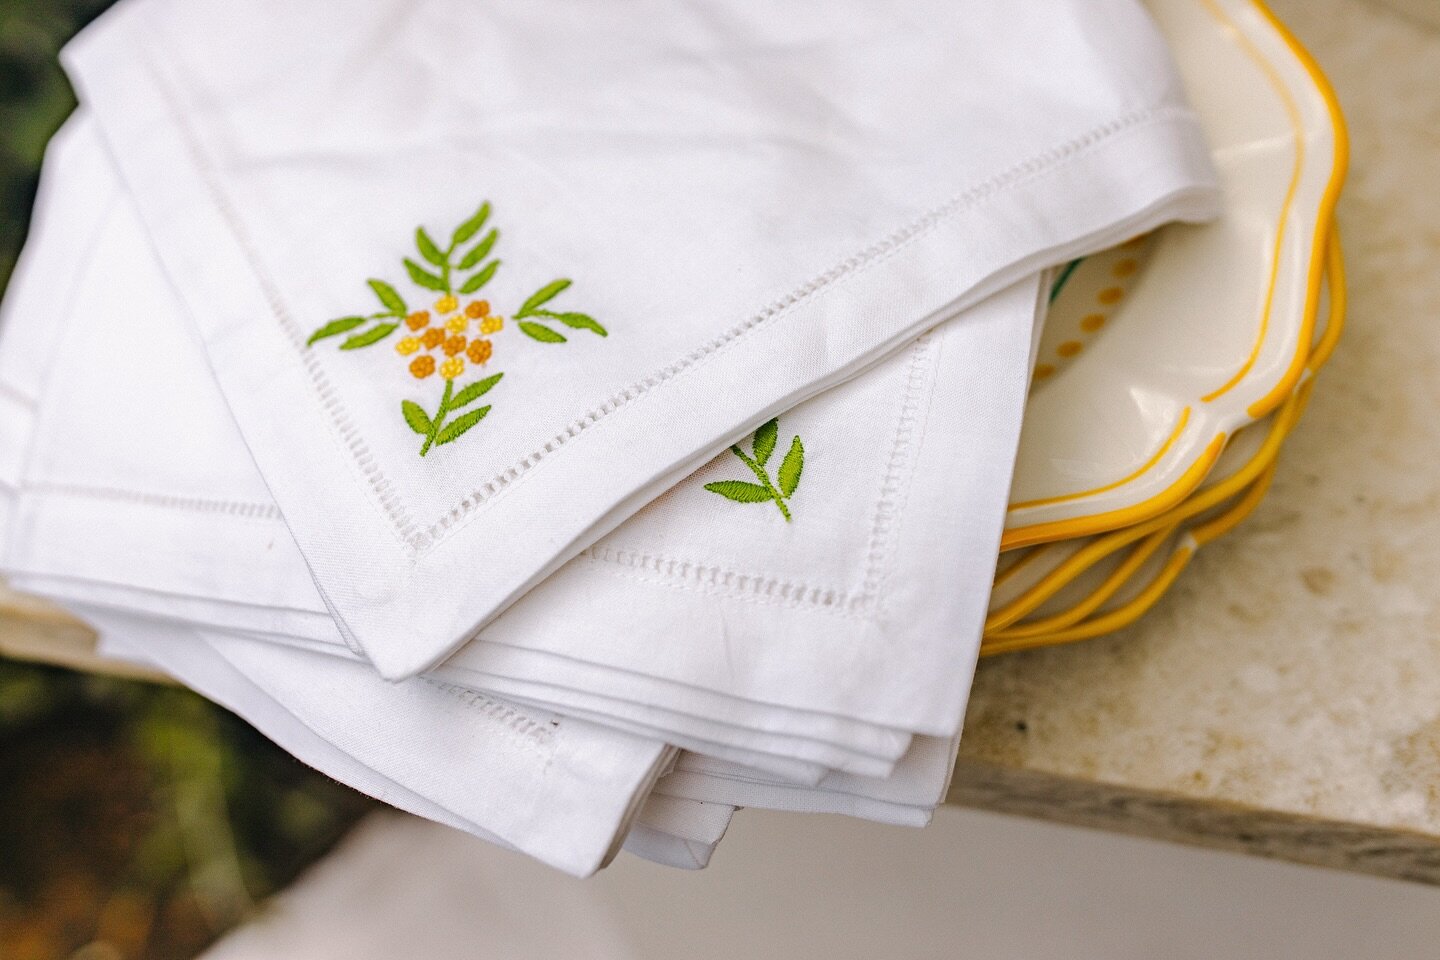 Hand made with love the beautiful hand stitched flowers on 100% cotton Summer in the Hamptons collection napkins 🌿🌼🌾